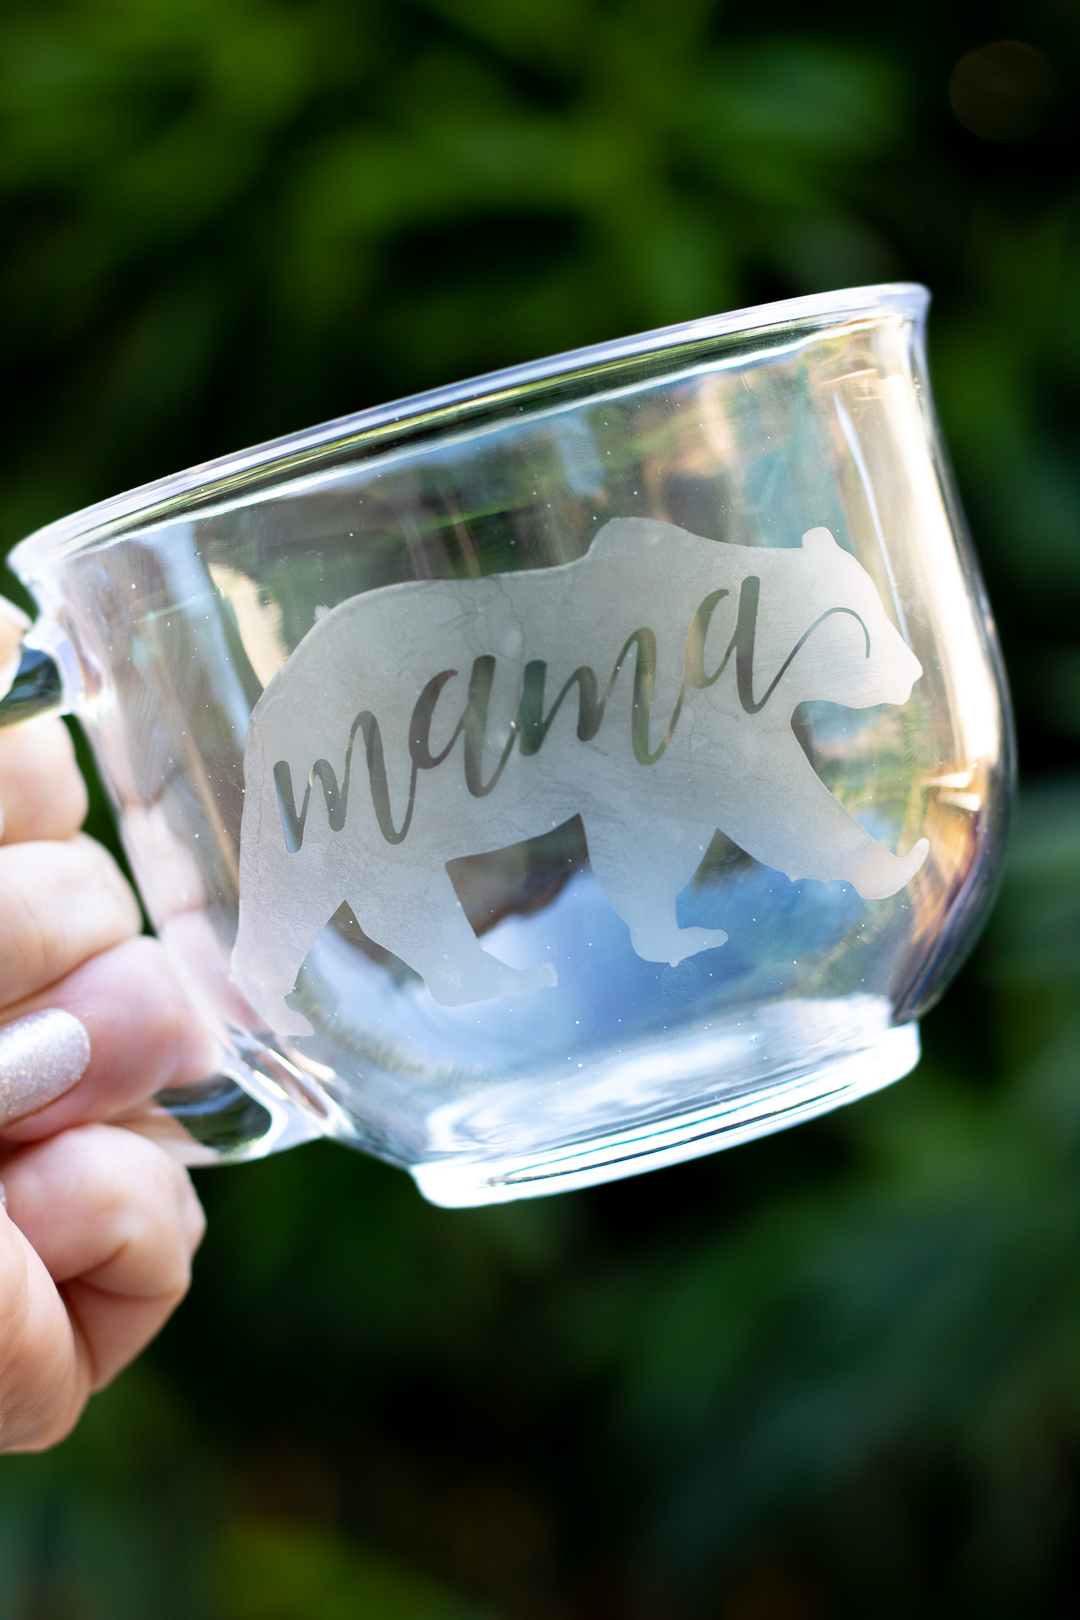 Cricut Glass Etching: How to Easily Etch Glass with Armour Etch! - Leap of  Faith Crafting